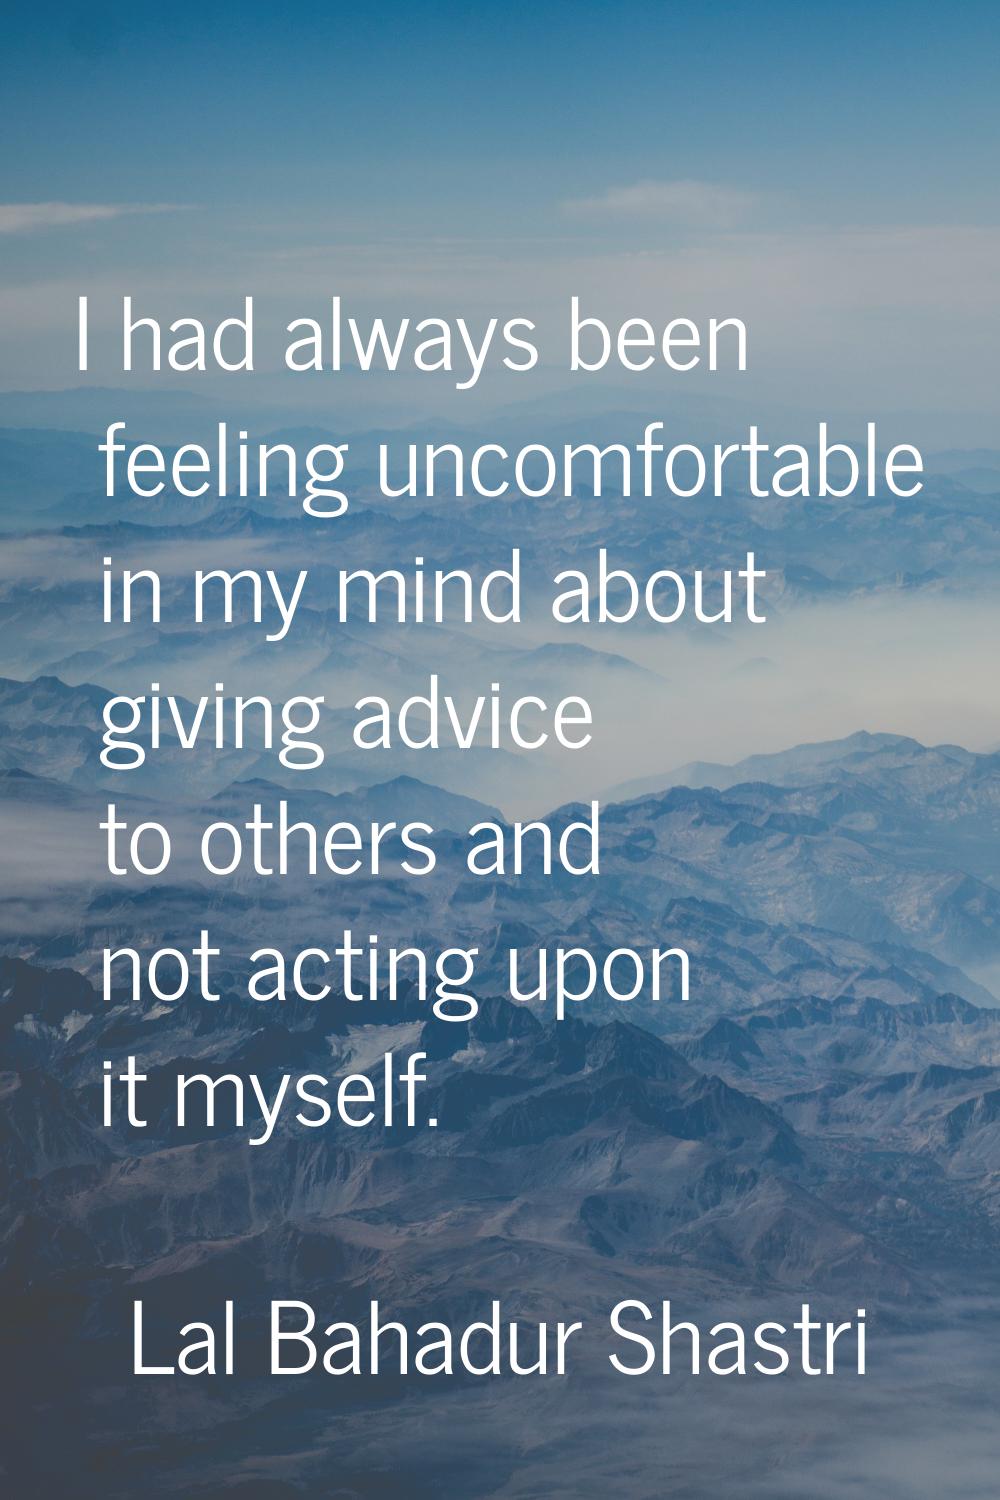 I had always been feeling uncomfortable in my mind about giving advice to others and not acting upo